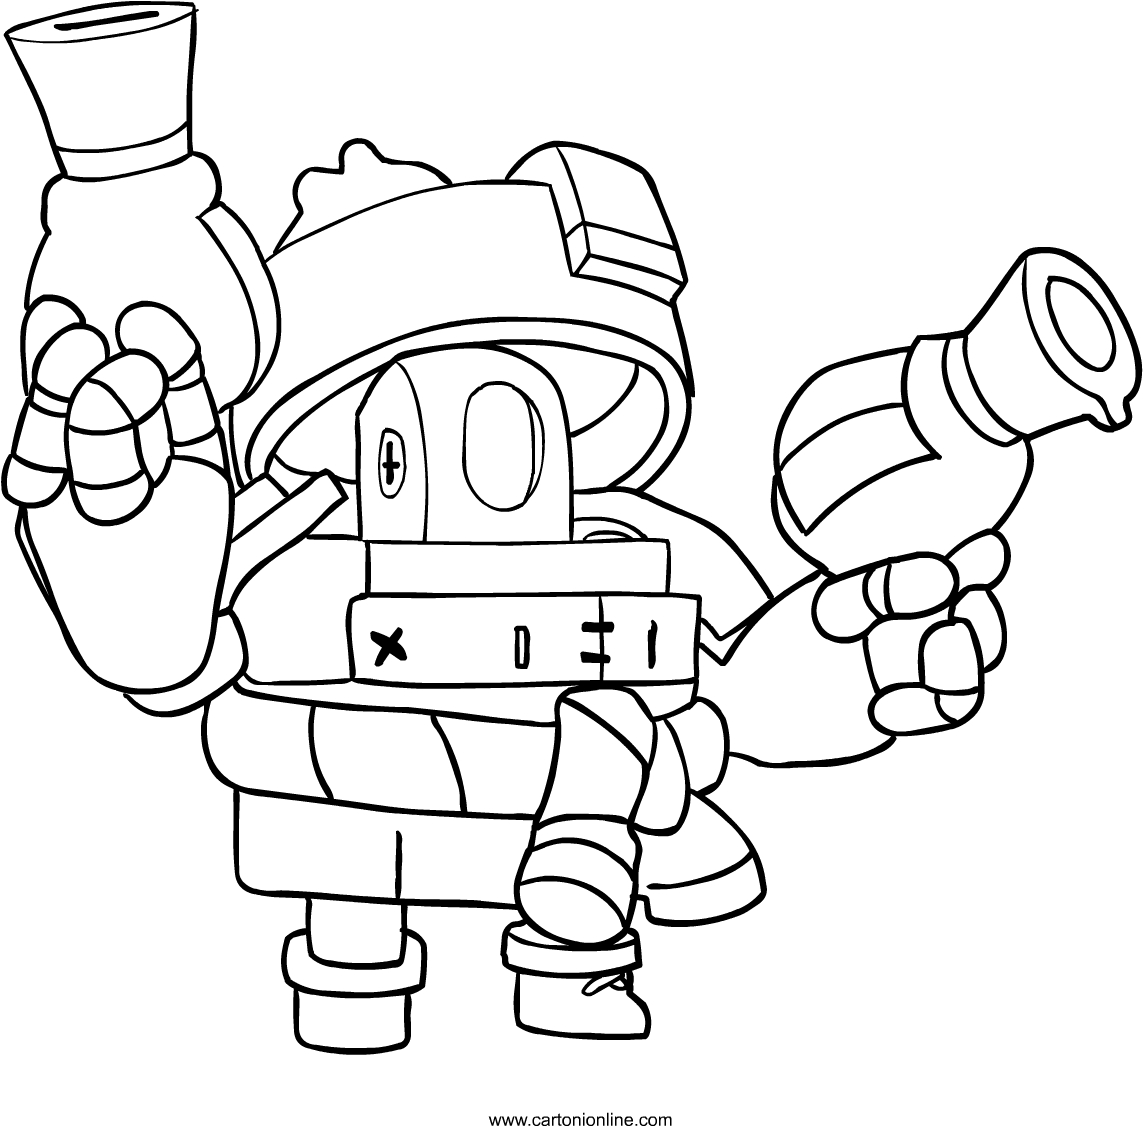 Darryl of Brawl Stars coloring page to print and color